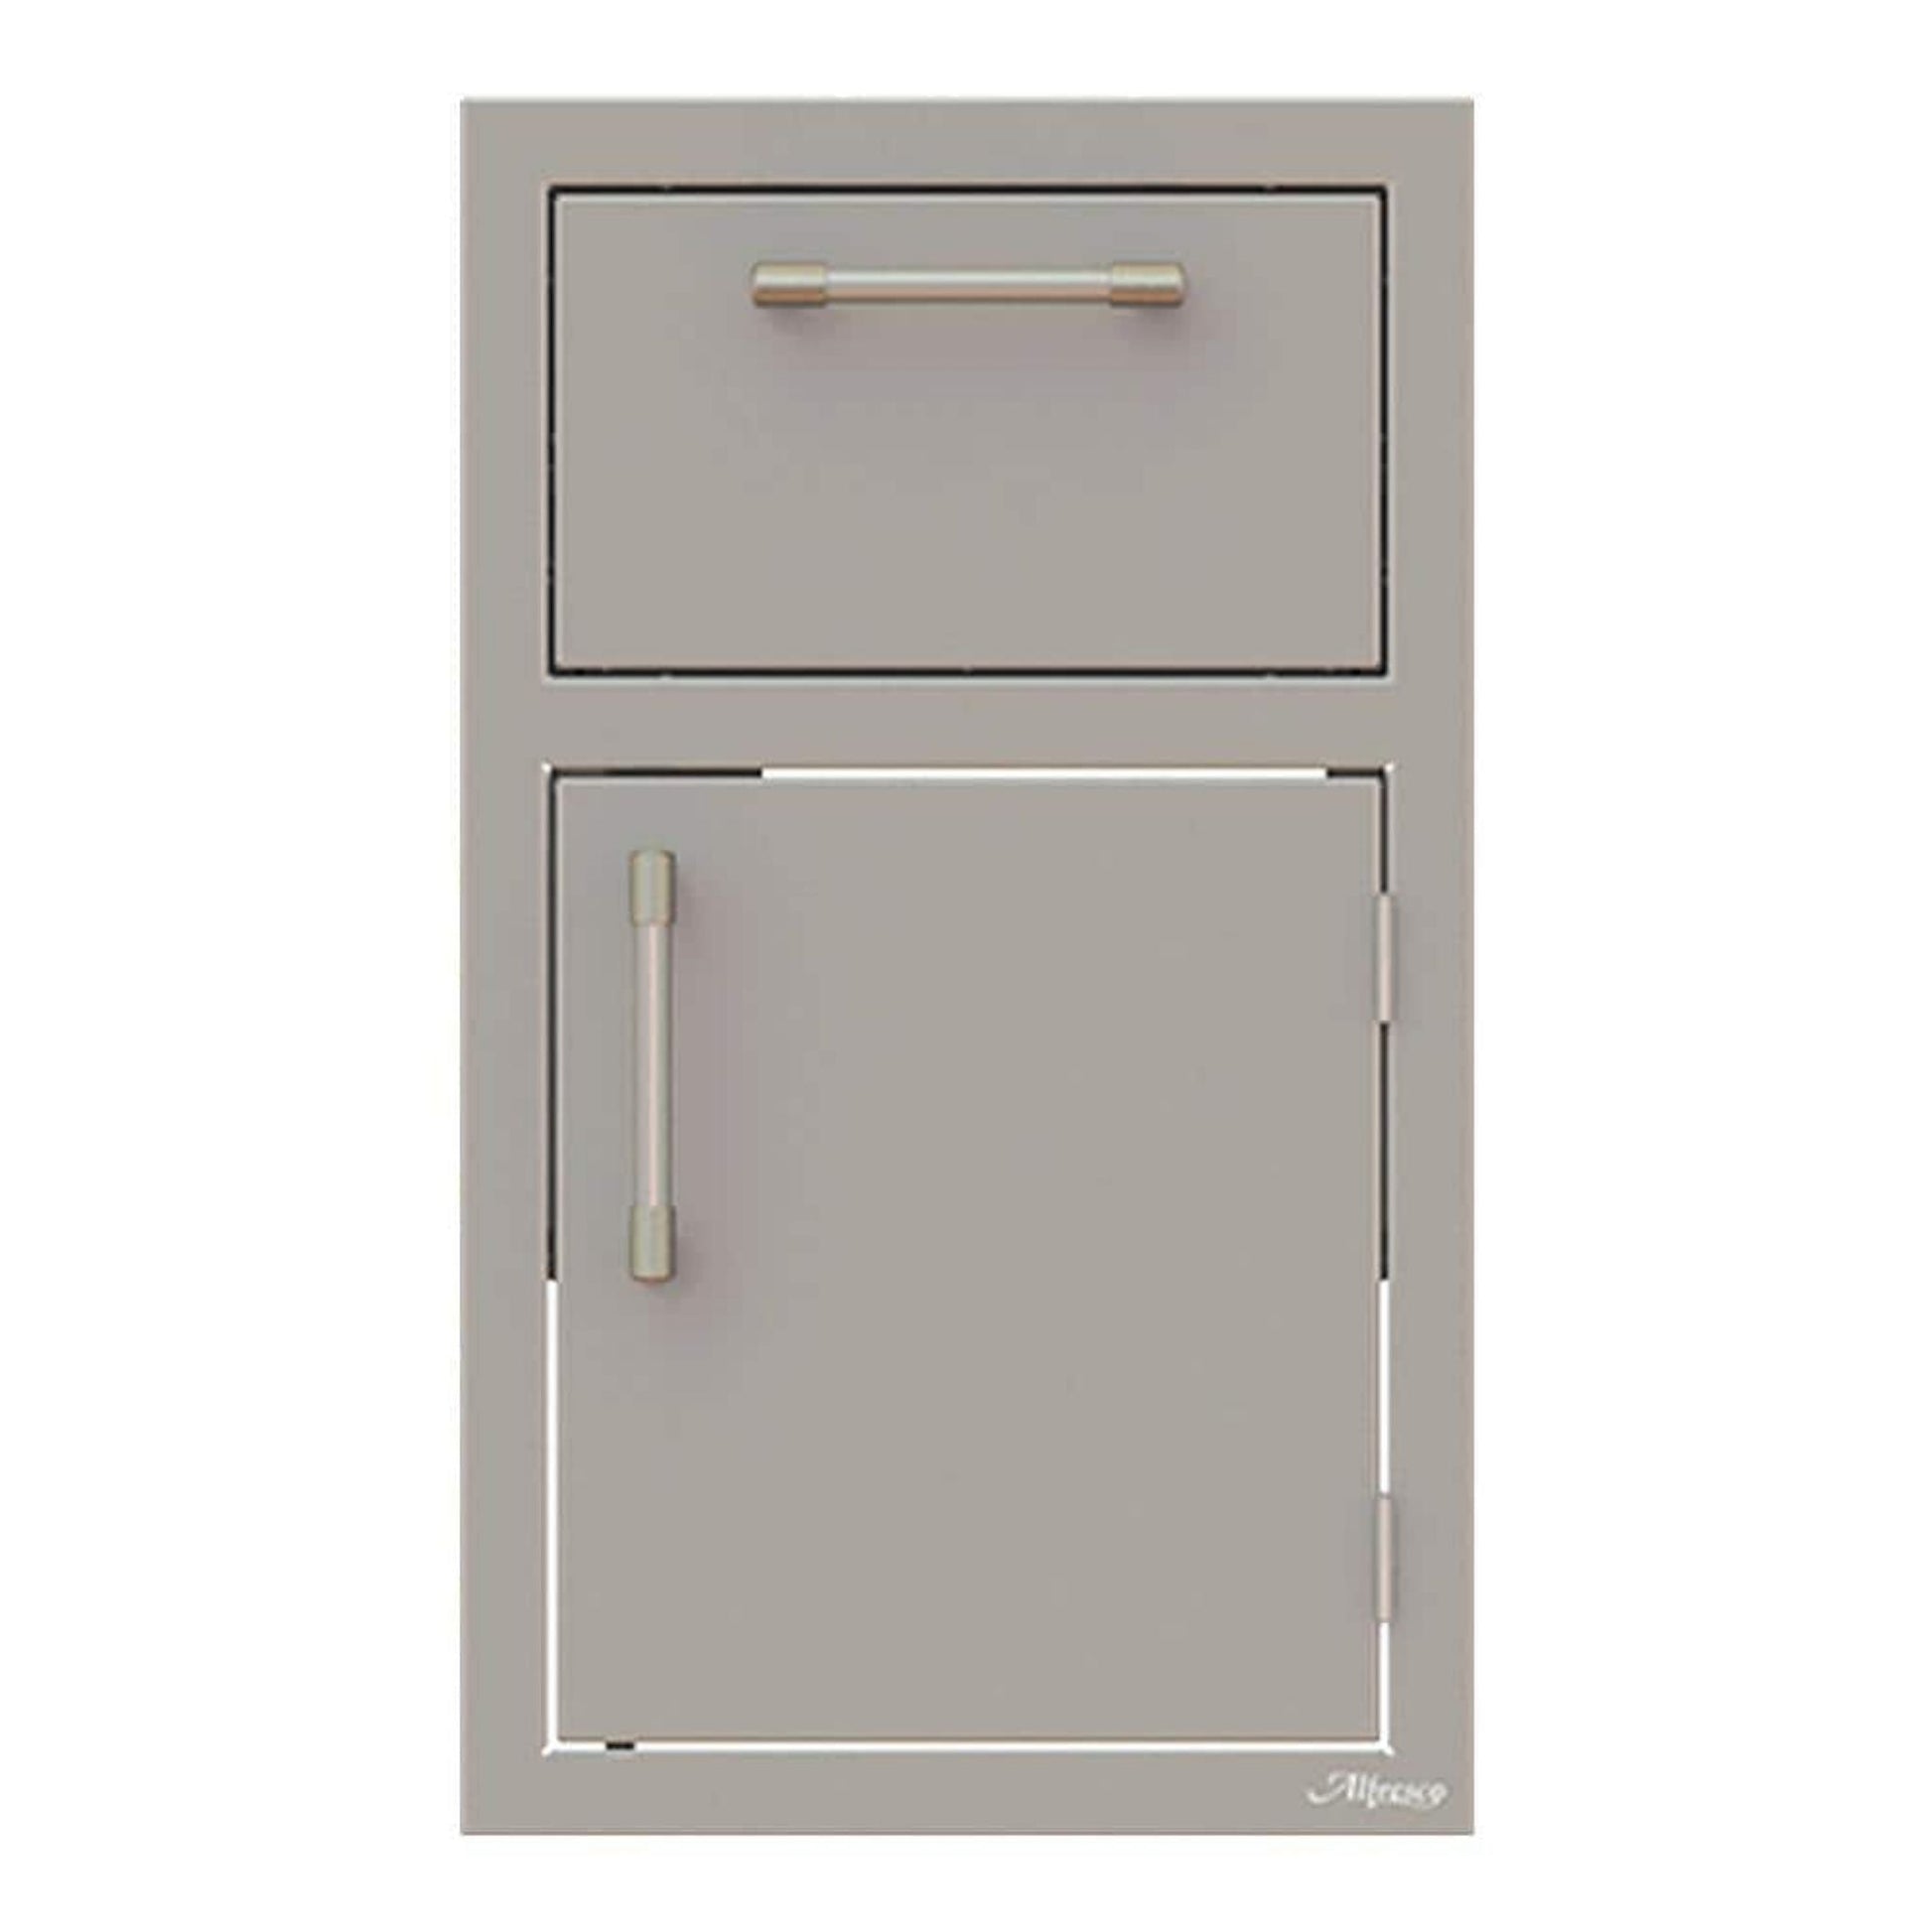 Alfresco 17" Carmine Red Gloss One Drawer with Door Open Right